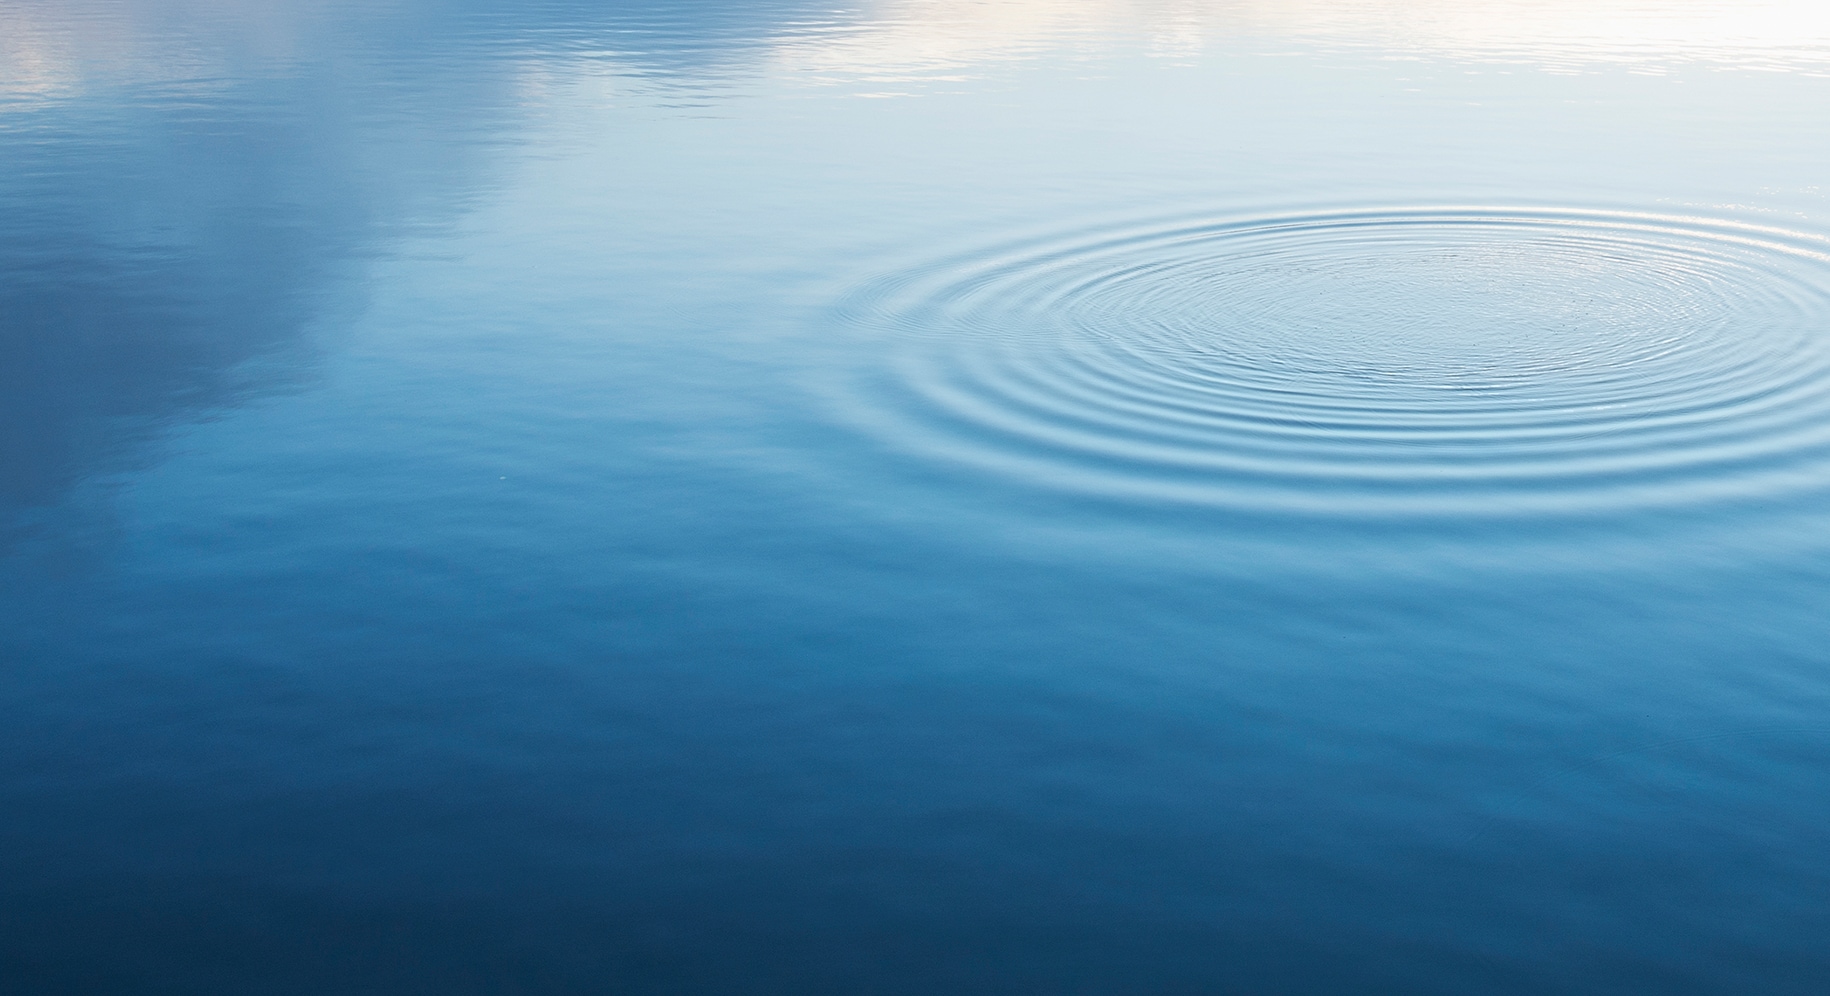 ripples on a body of water